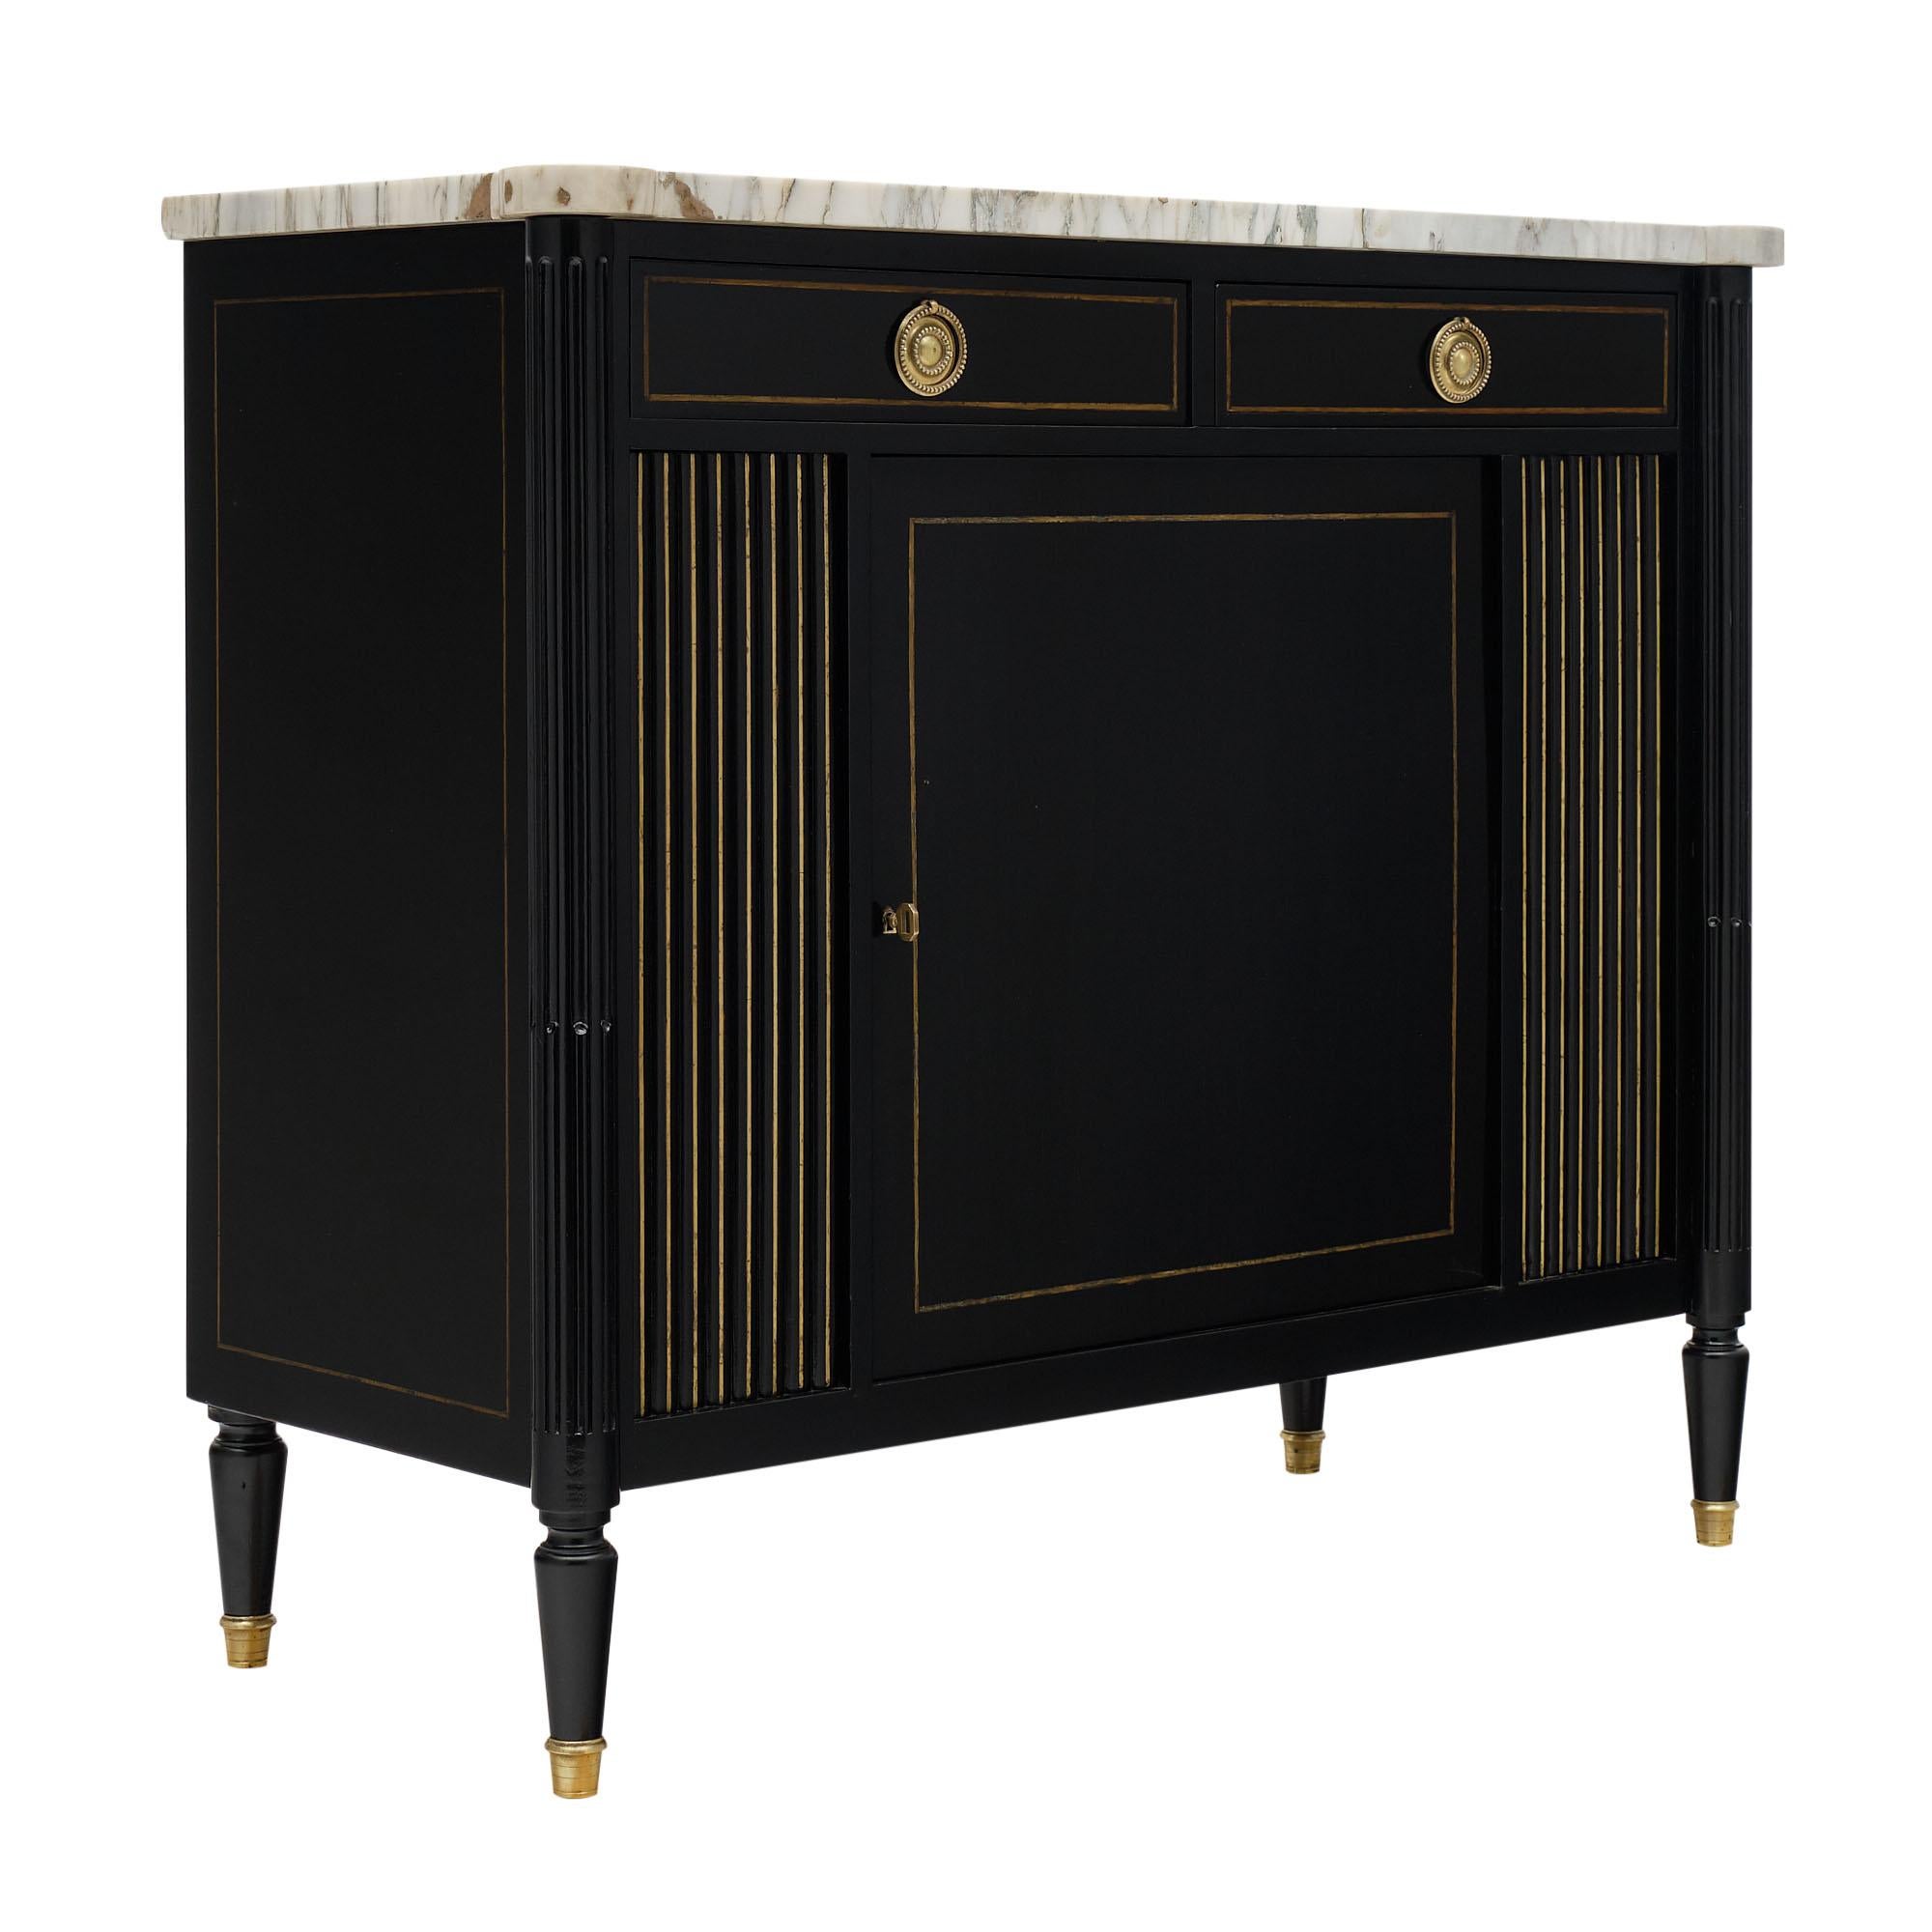 Buffet from France made of mahogany that has been ebonized and finished with a lustrous French polish. The brass inlays throughout add classic detail with finely cast bronze hardware and feet. The top is an intact Carrara marble top. There are two